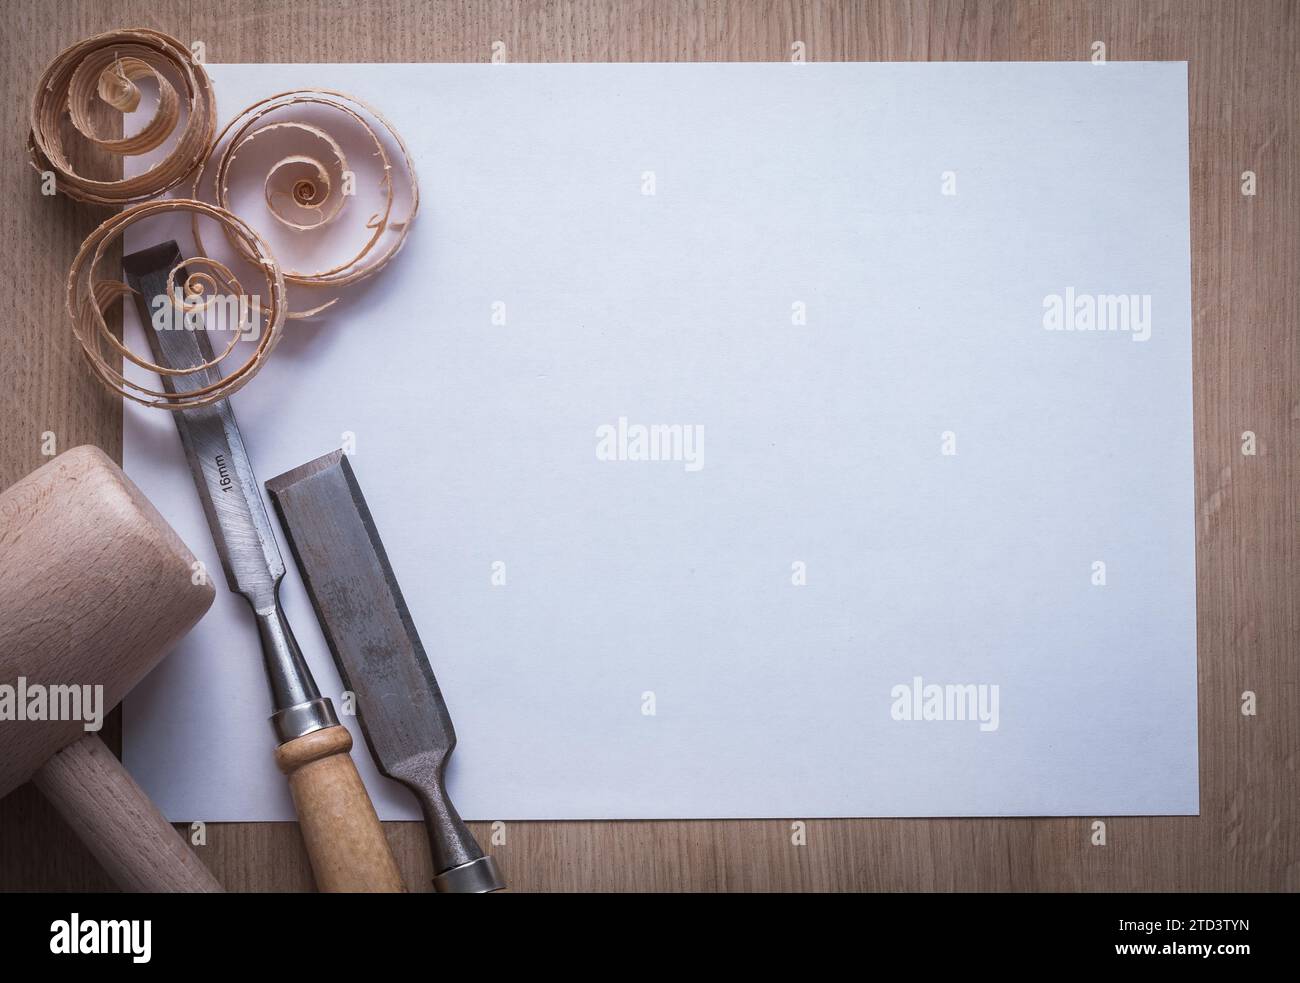 Curled wood shavings solid chisel lump hammer and blank sheet of paper on wooden board copyspace image construction concept Stock Photo